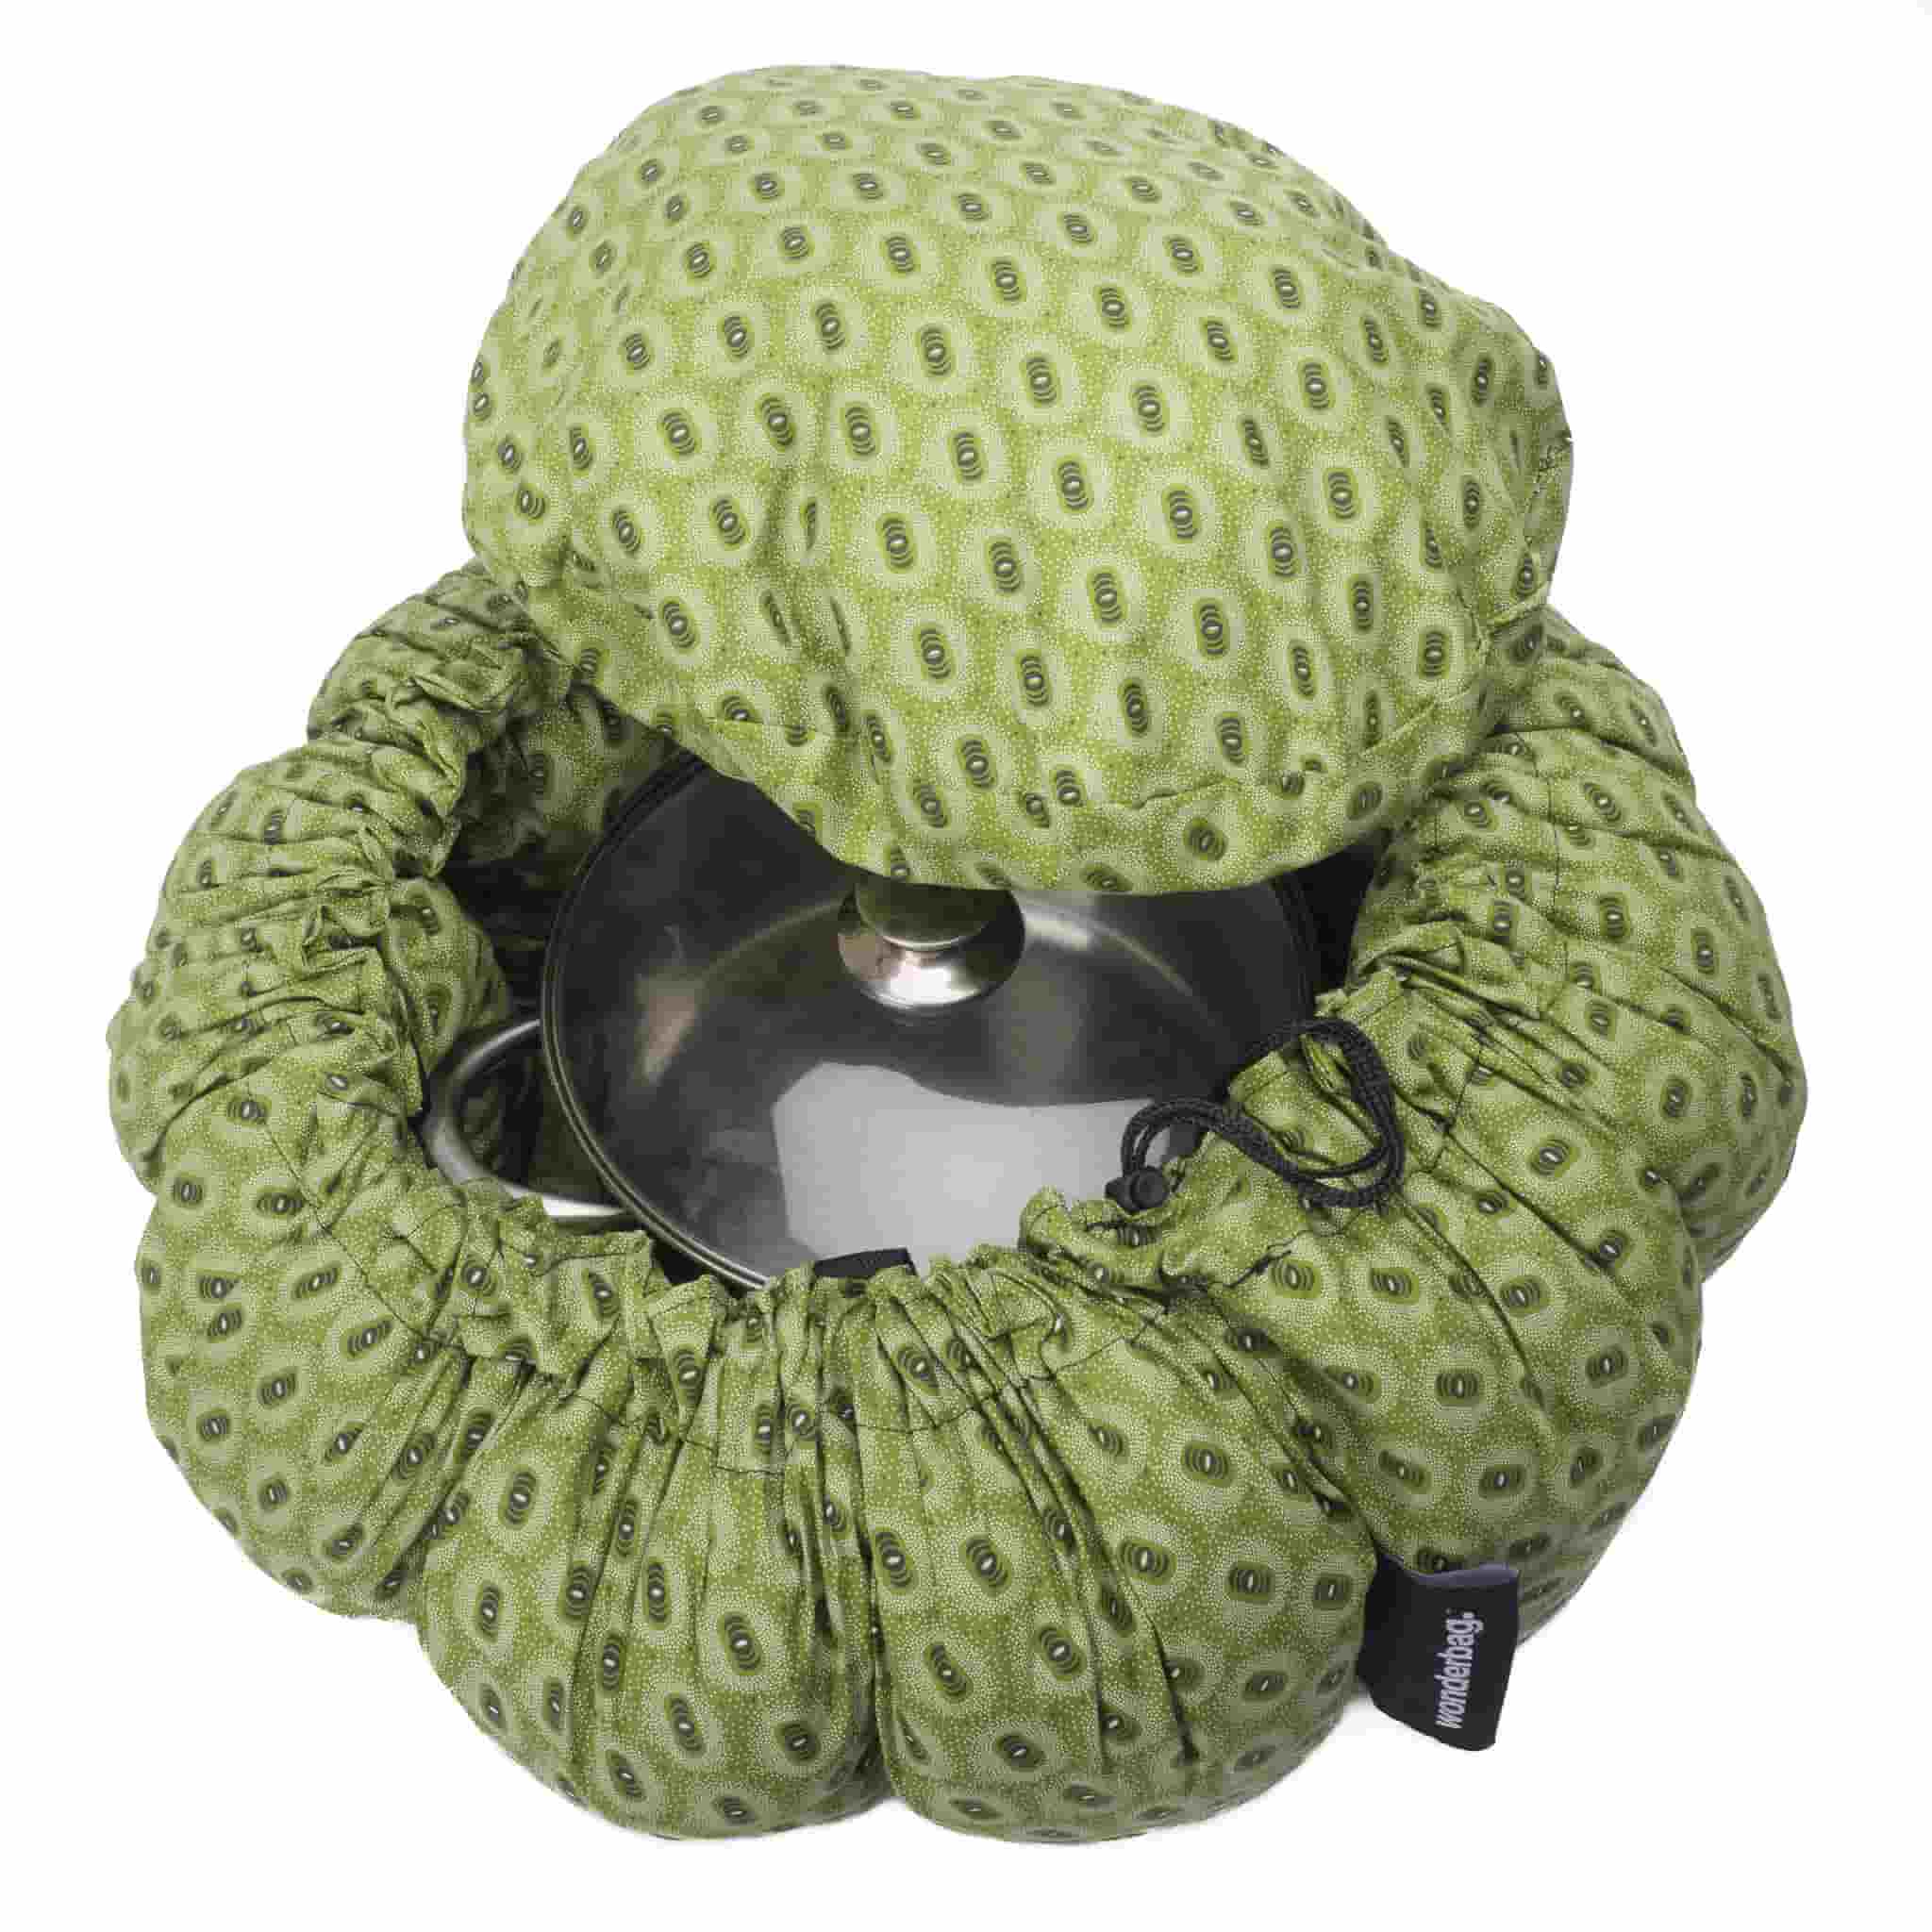 Wonderbag Non-Electric Slow Cooker, Green